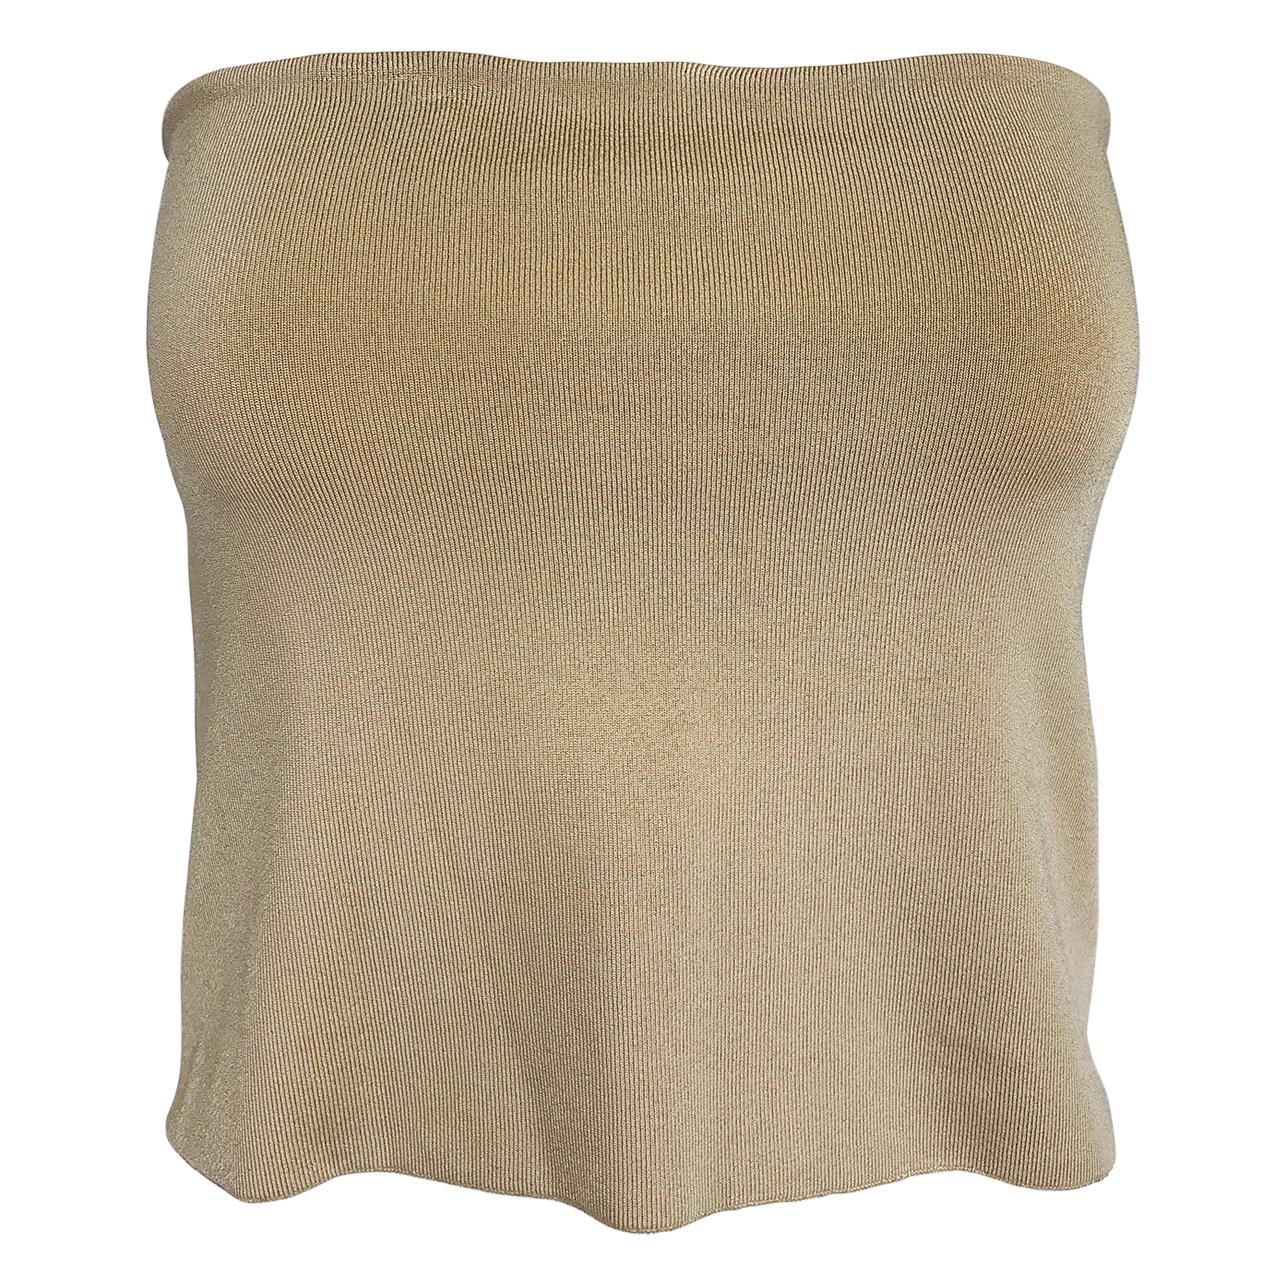 Ferragamo Silky Taupe Knit Stretch Bandeau Top Large